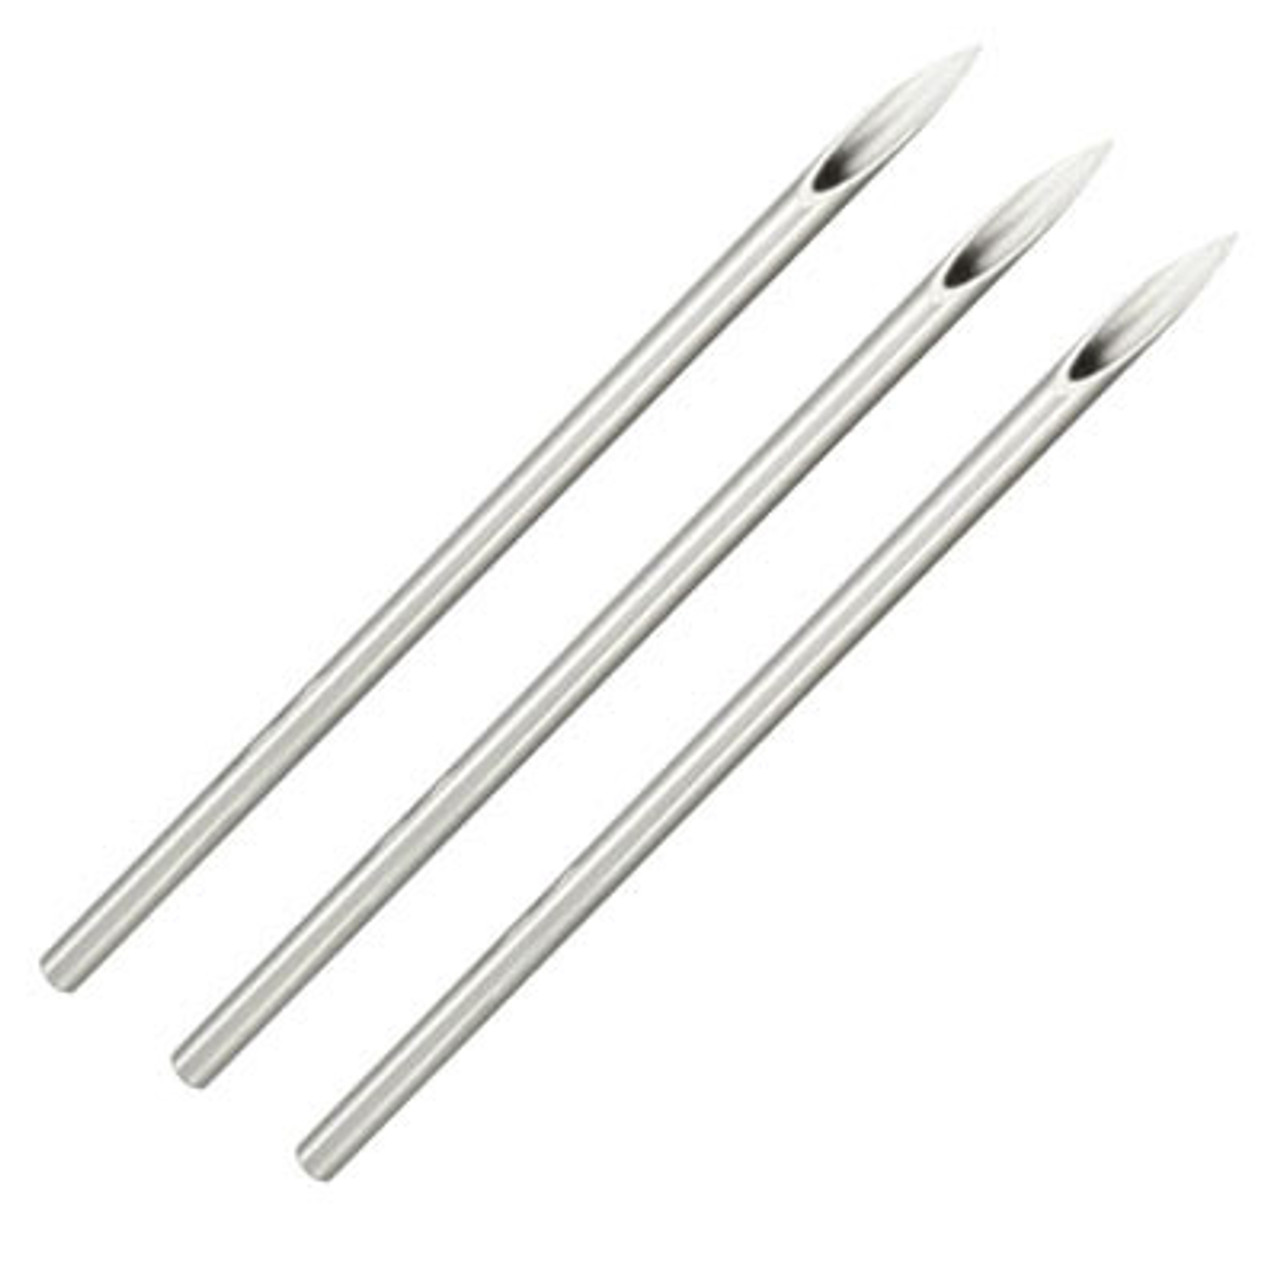 16G Curved Body Piercing Needles, Box of 50